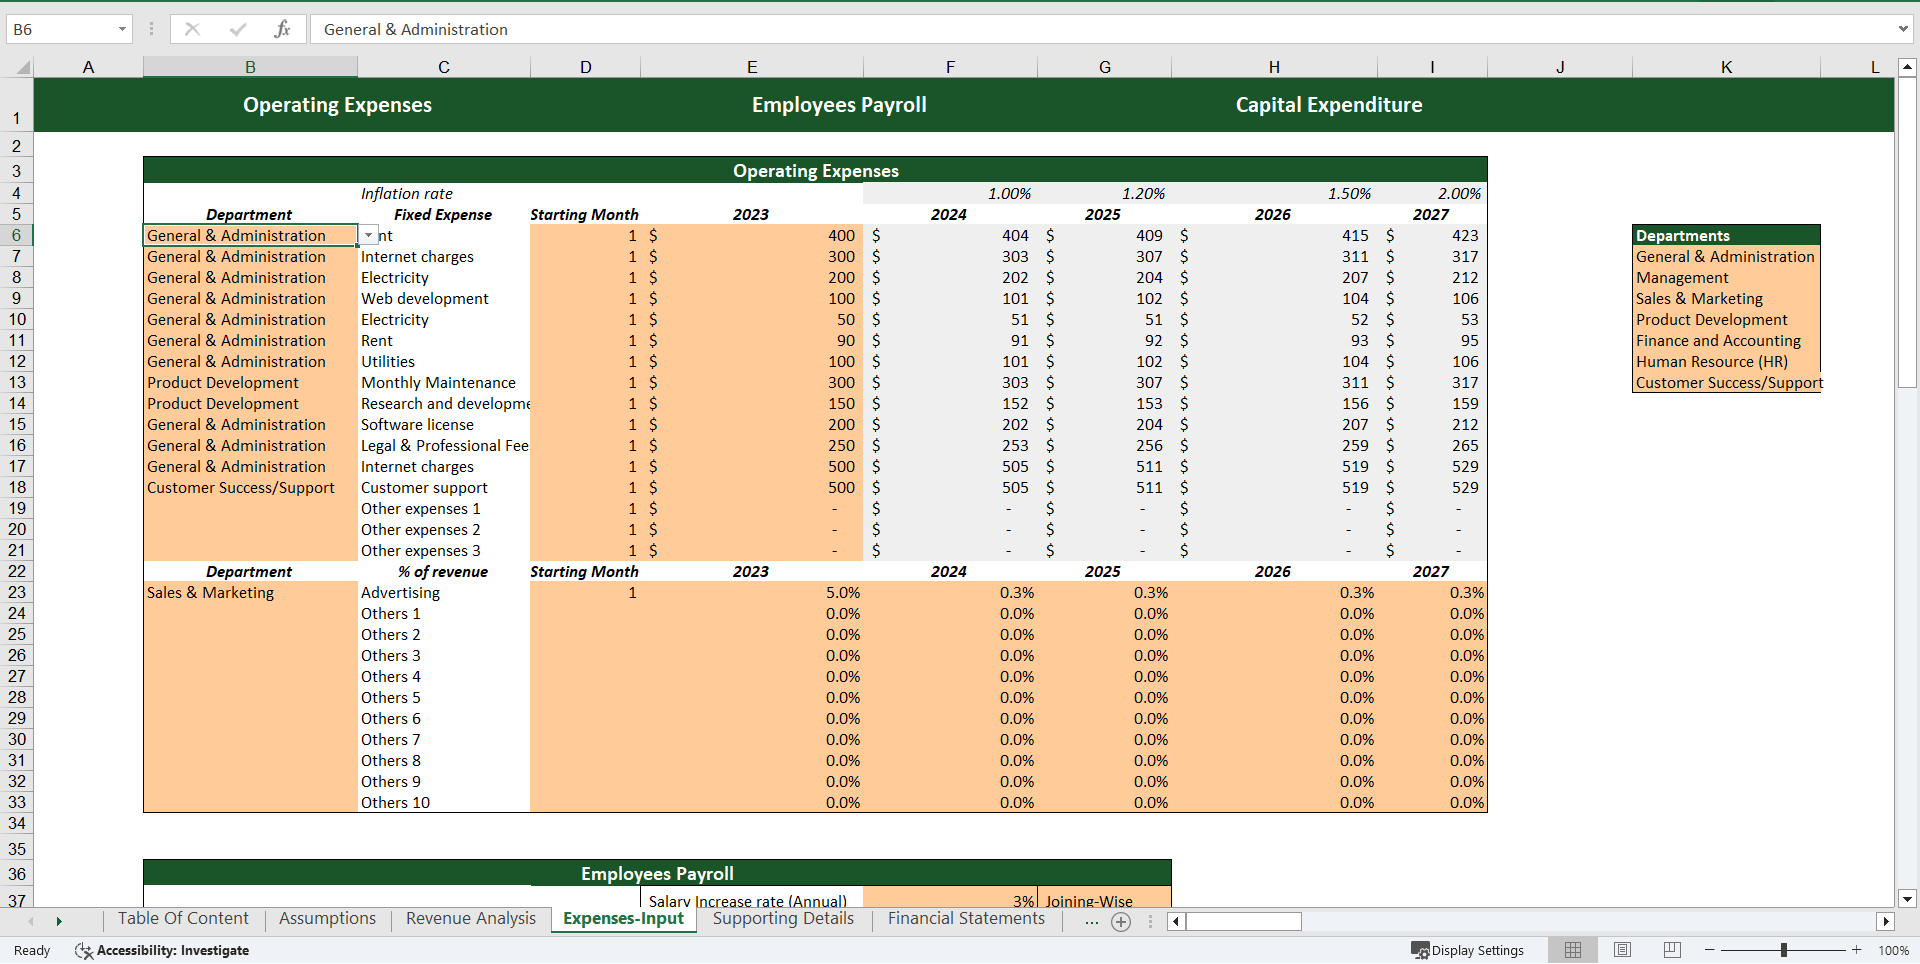 Casino Hotel Excel Financial Model (Excel template (XLSX)) Preview Image